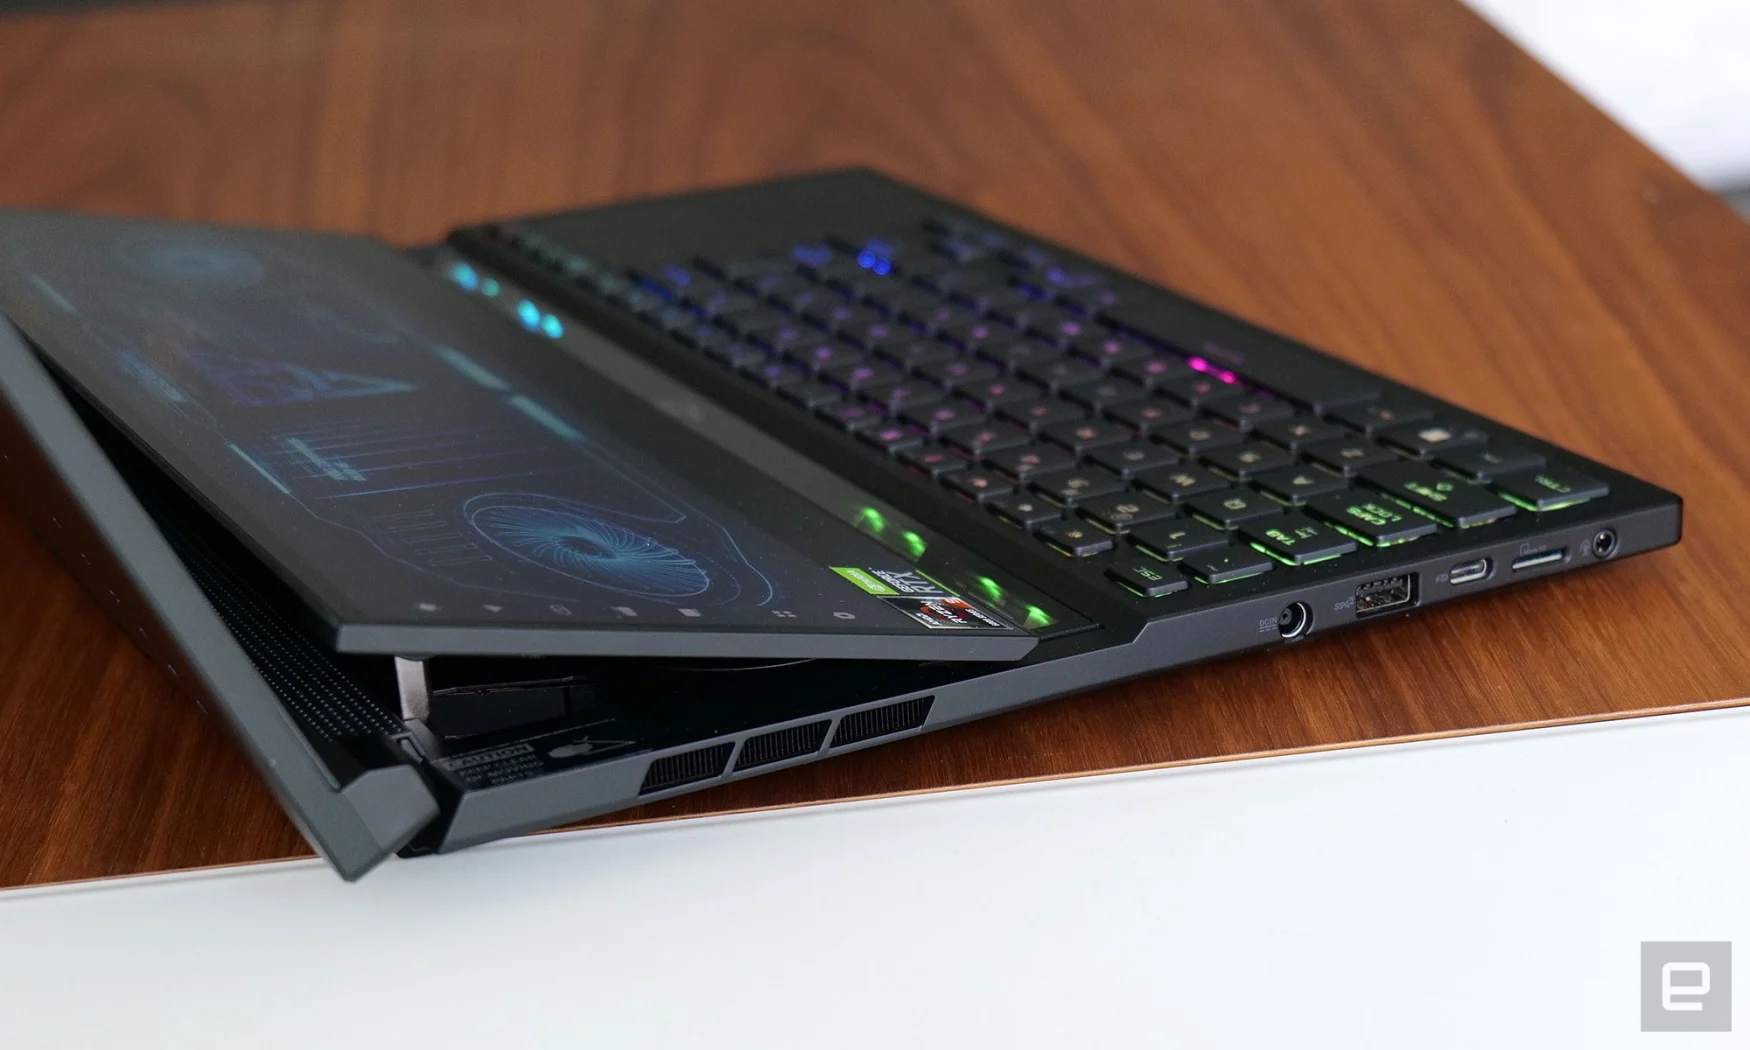 The Asus ROG Zephyrus Duo 16 features a wealth of ports including two USB-A ports, two USB-C ports, HDMI 2.1, a microSD card reader and an Ethernet jack.